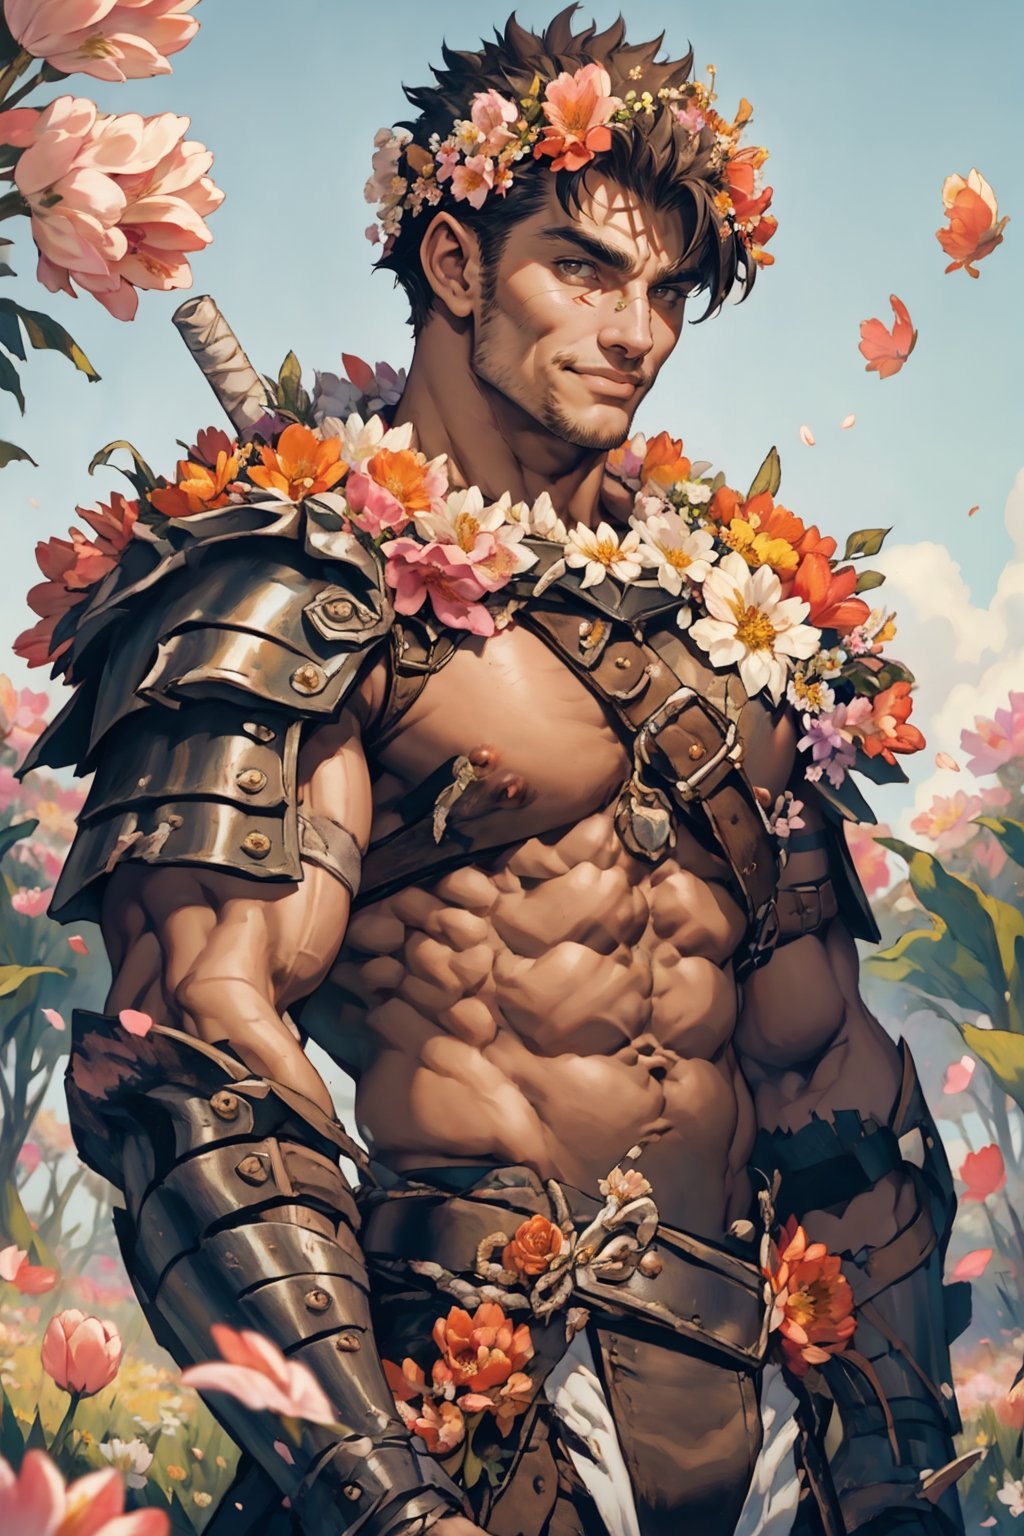 flower4rmor, flower barbarian armor, front view image of "Guts" from Berserk wearing flower barbarian armor, in a field of tulips, sunny summer day, bare chest, very hairy chest, pectoral muscles short hair, flower crown on his head, flower petals in the wind, facing the viewer, turned towards the viewer, happy expression, smiling at the viewer, expressive brown eyes, harness, realistic, masterpiece, high quality, intricate details, detailed background, depth of field, mature, 40 years old, detailed face, Pectoral Focus